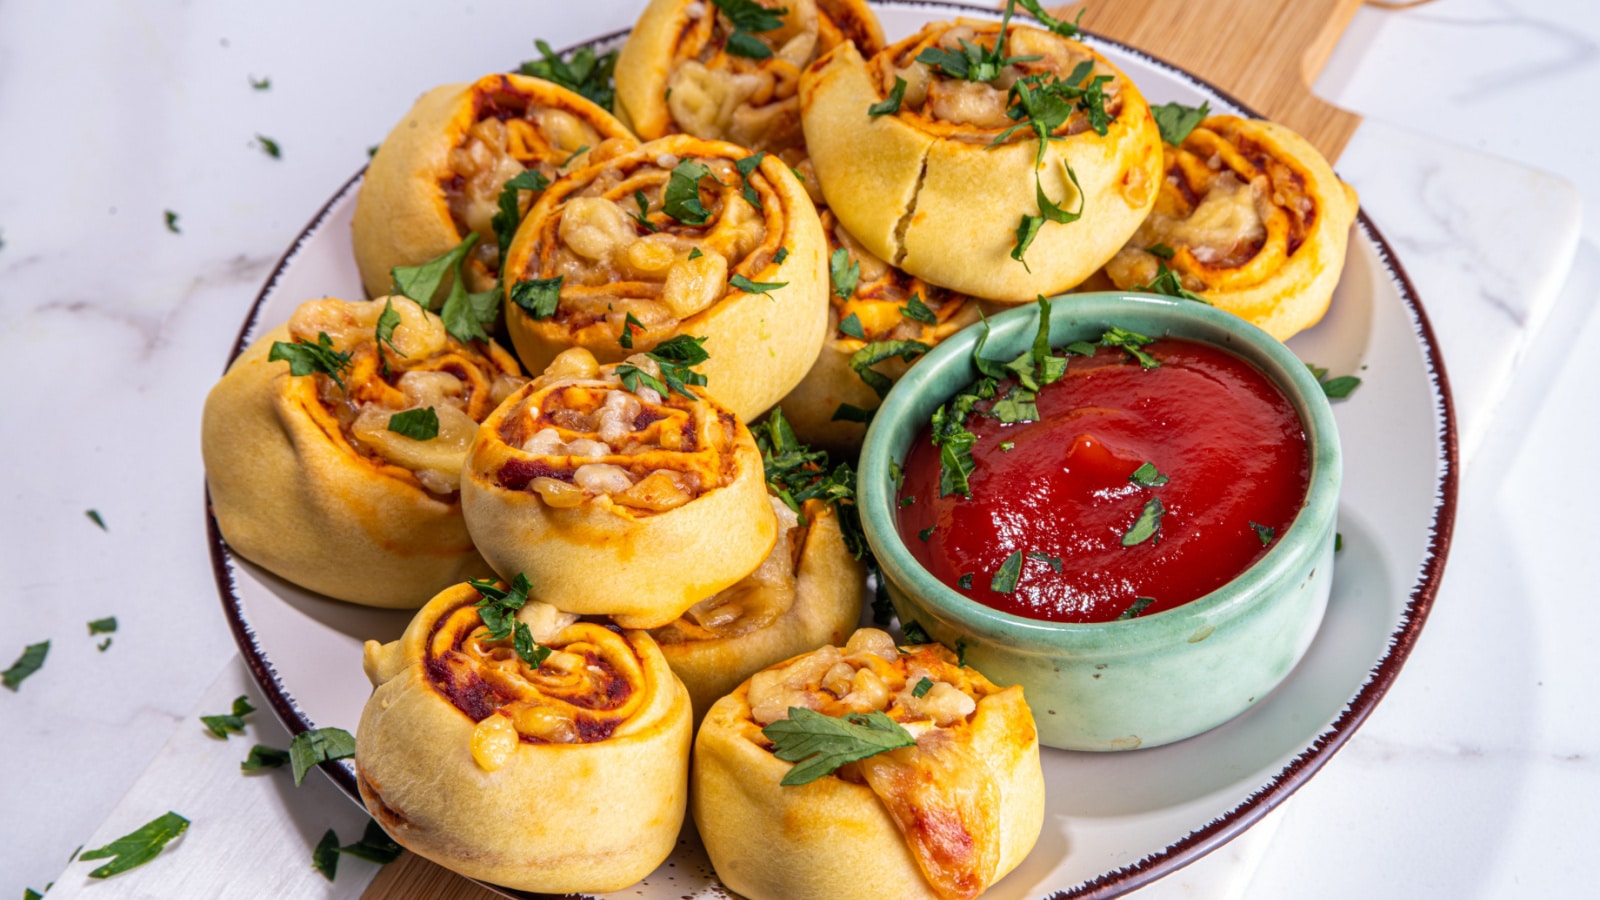 Homemade twisted Pizza rolls with tomato sauce, tomato, and cheese, trendy finger food eating pizza bites